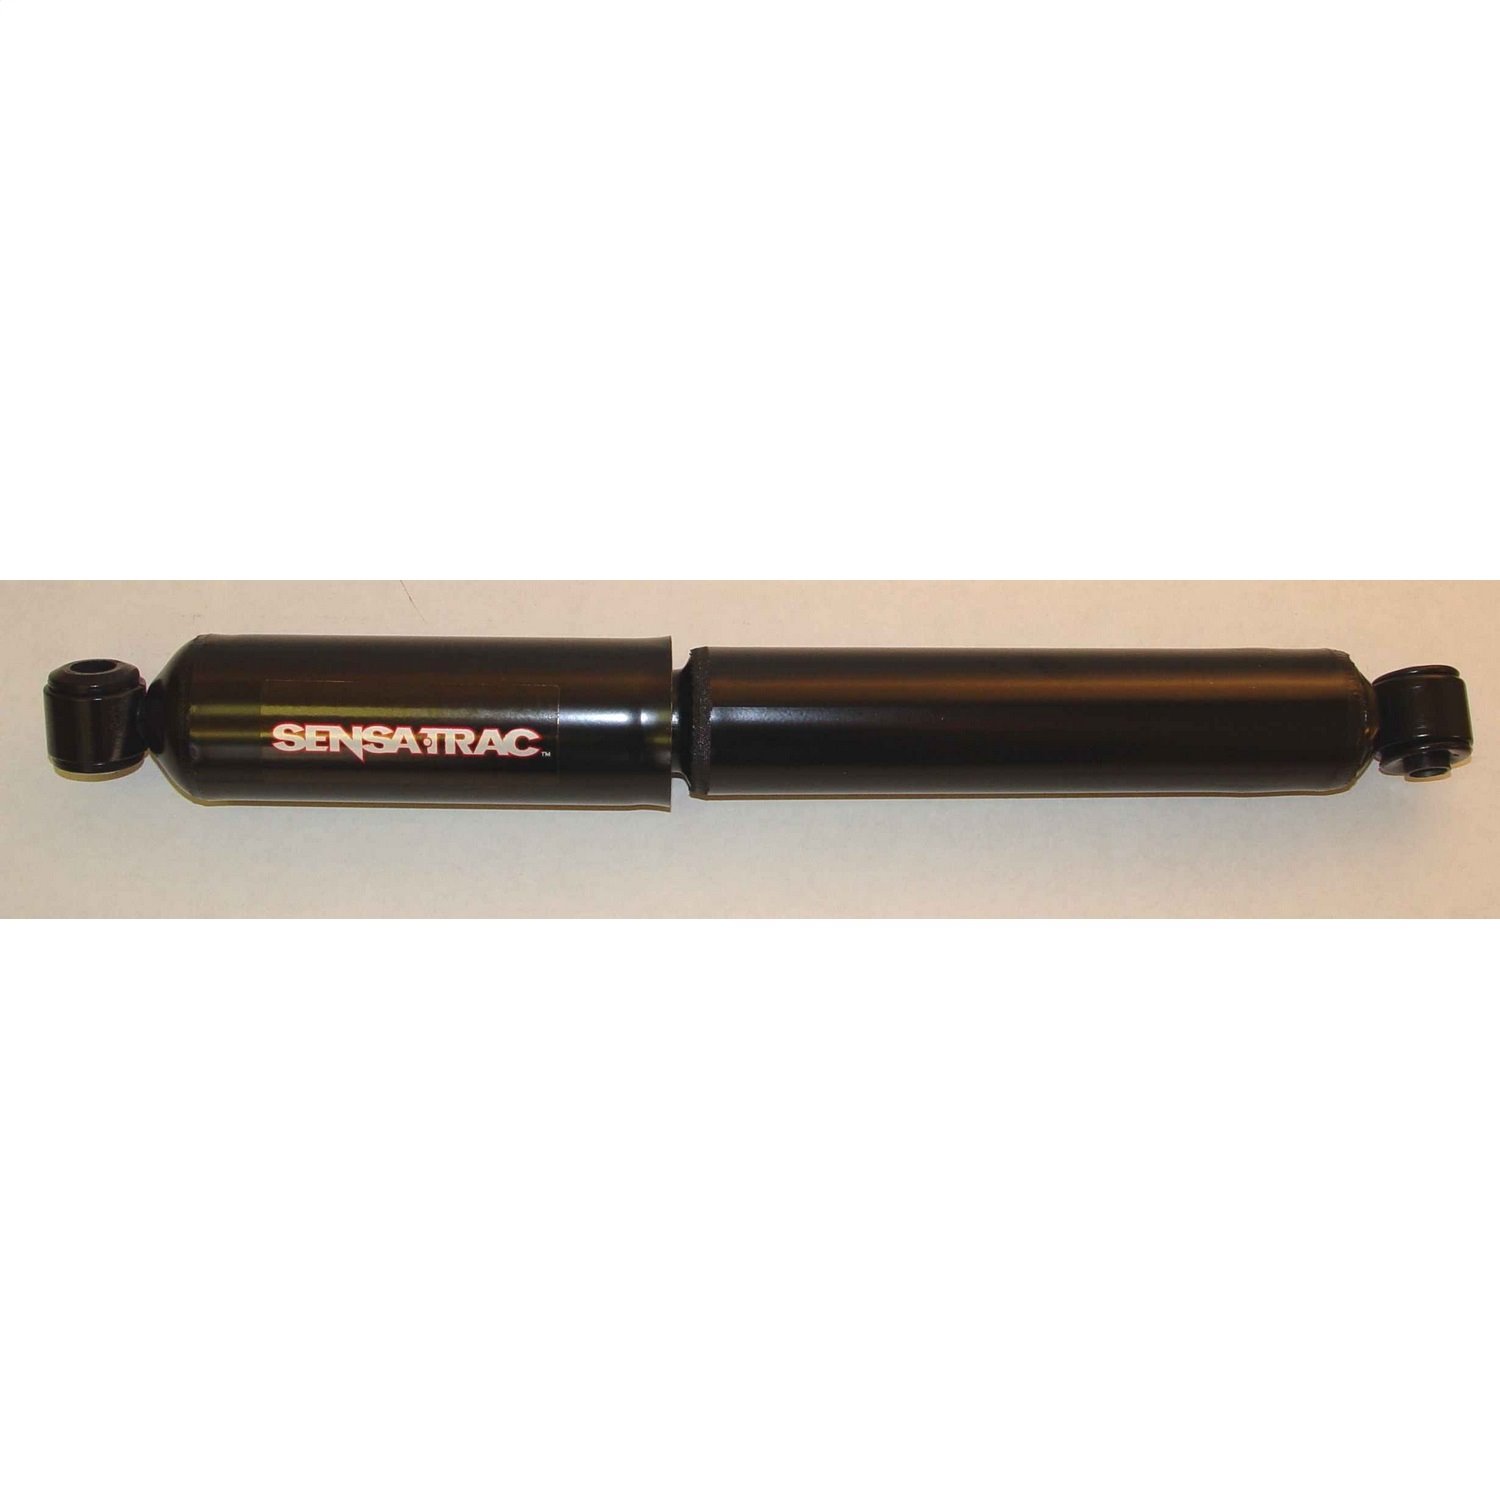 Replacement rear shock absorber from Omix-ADA, Fits 87-95 Jeep Wrangler YJ